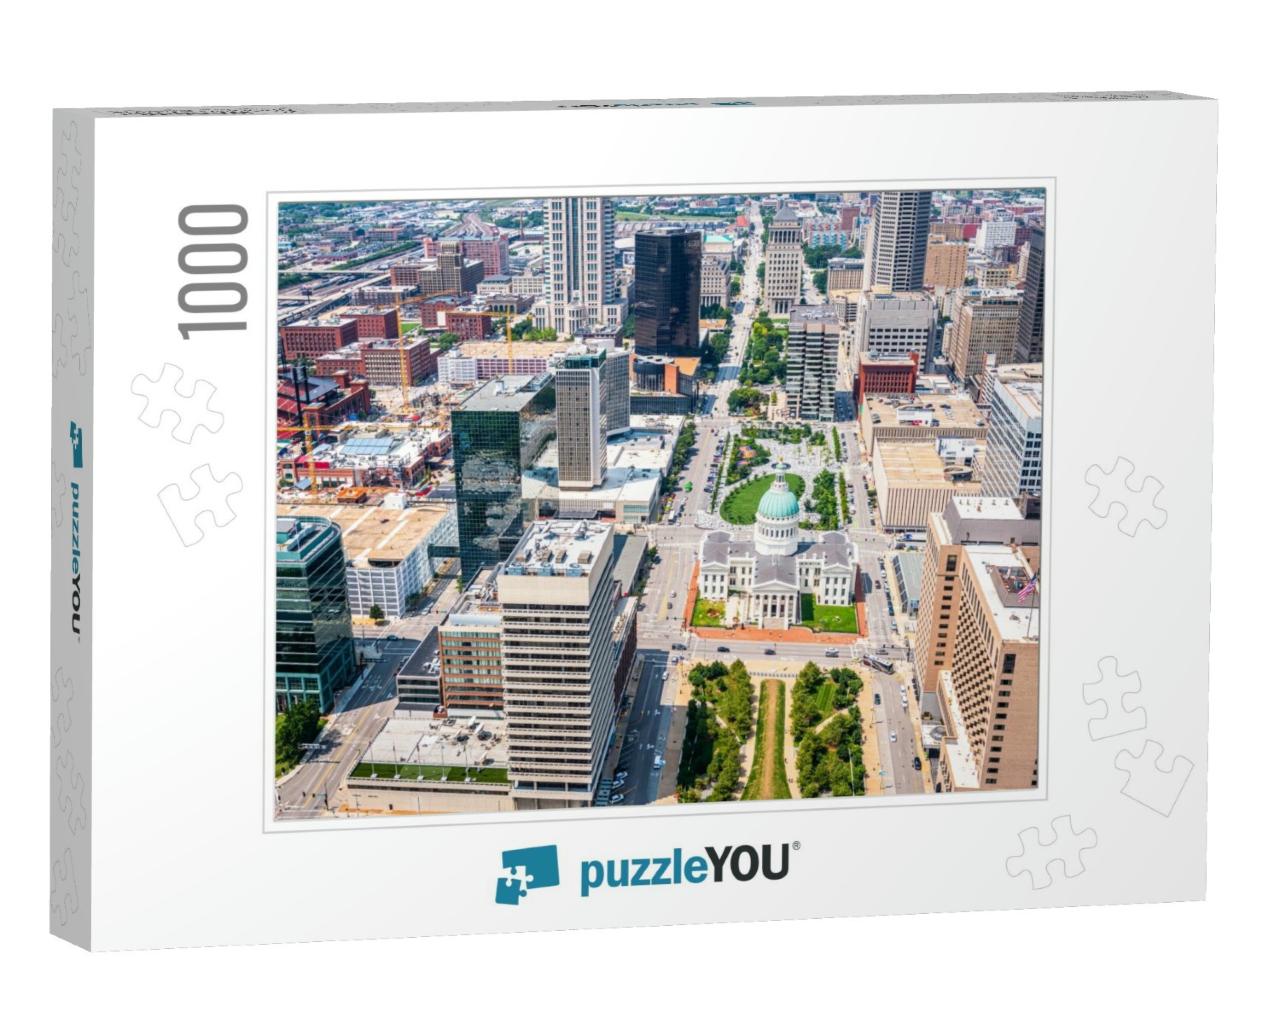 St. Louis, Missouri, USA Downtown Skyline from Above... Jigsaw Puzzle with 1000 pieces